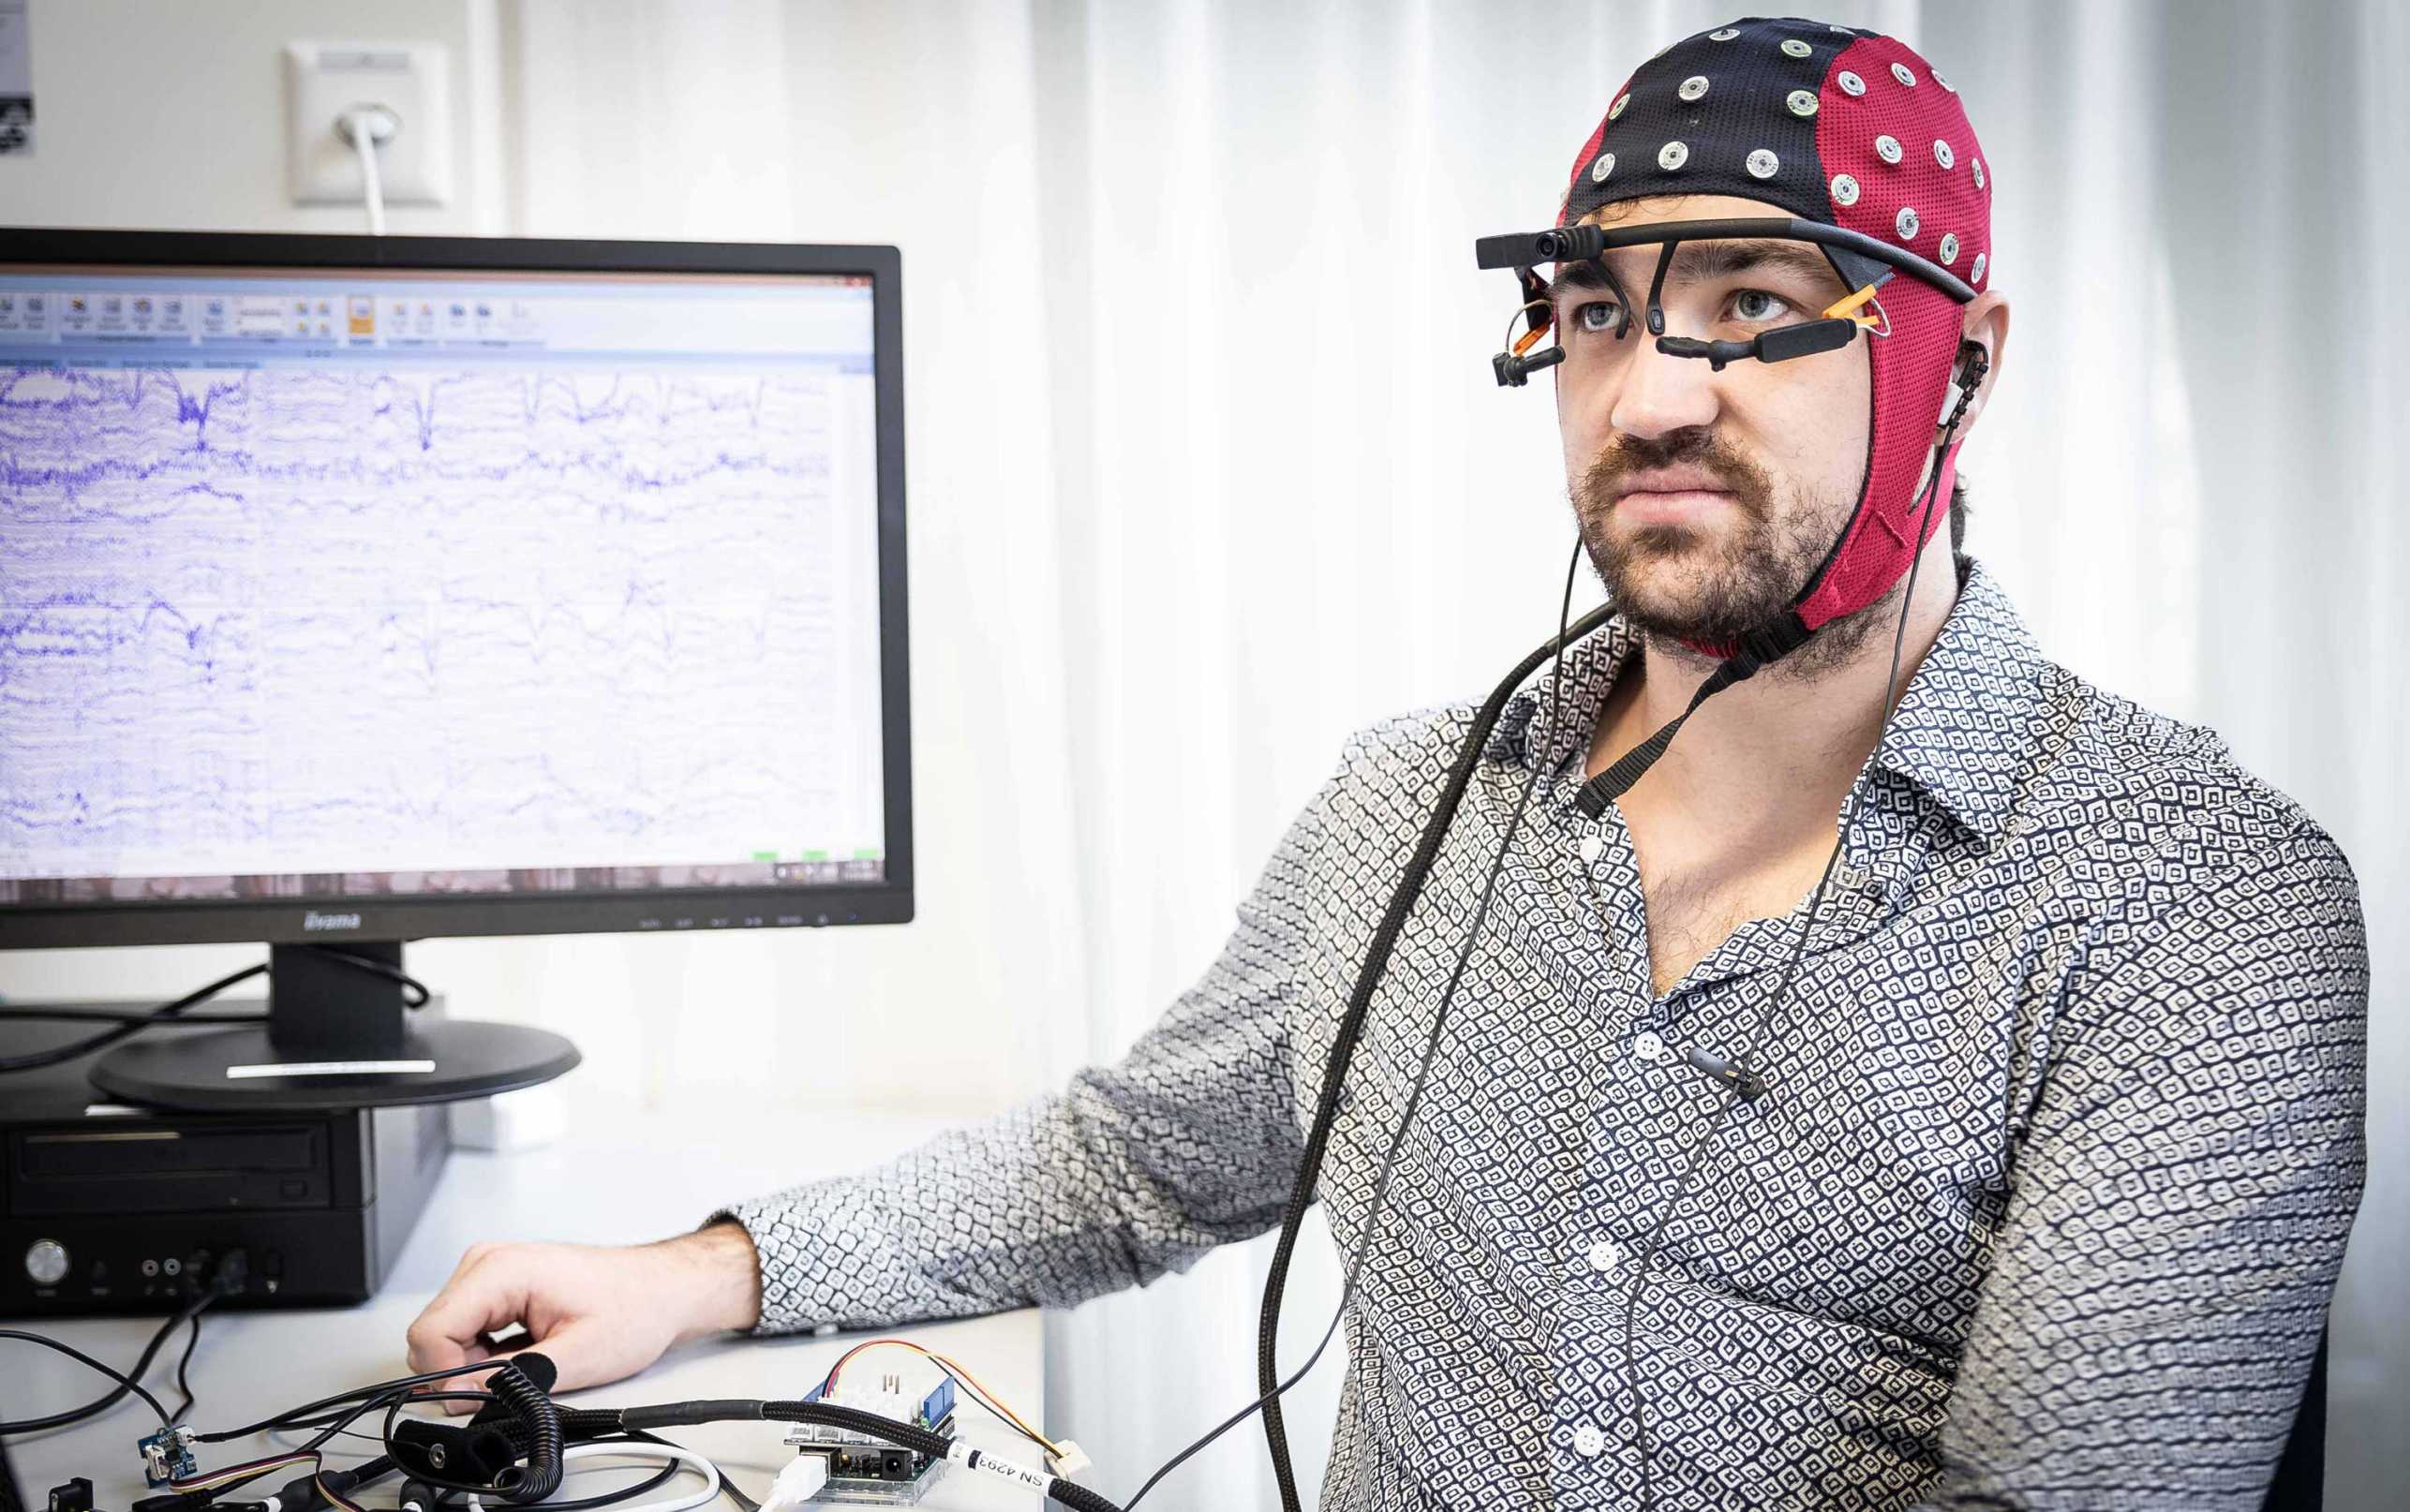 Enlarged view: Dane Donegan with Eye Tracking Glasses and Brain Compute Interface